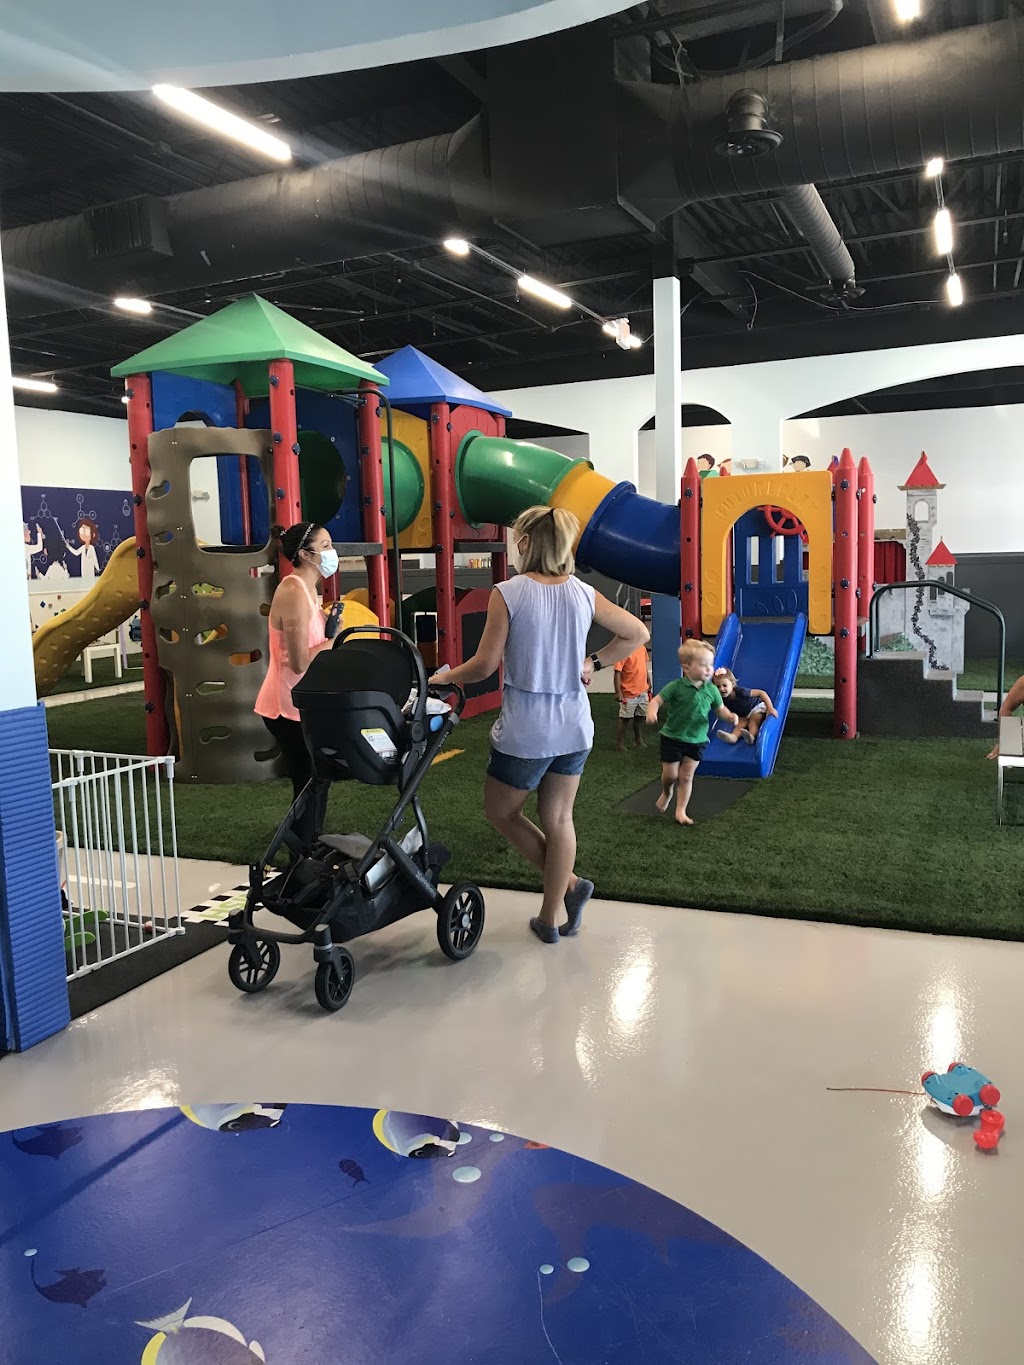 Our Kids Place LKN | 115 Commons Dr J, Mooresville, NC 28117, USA | Phone: (980) 444-0066